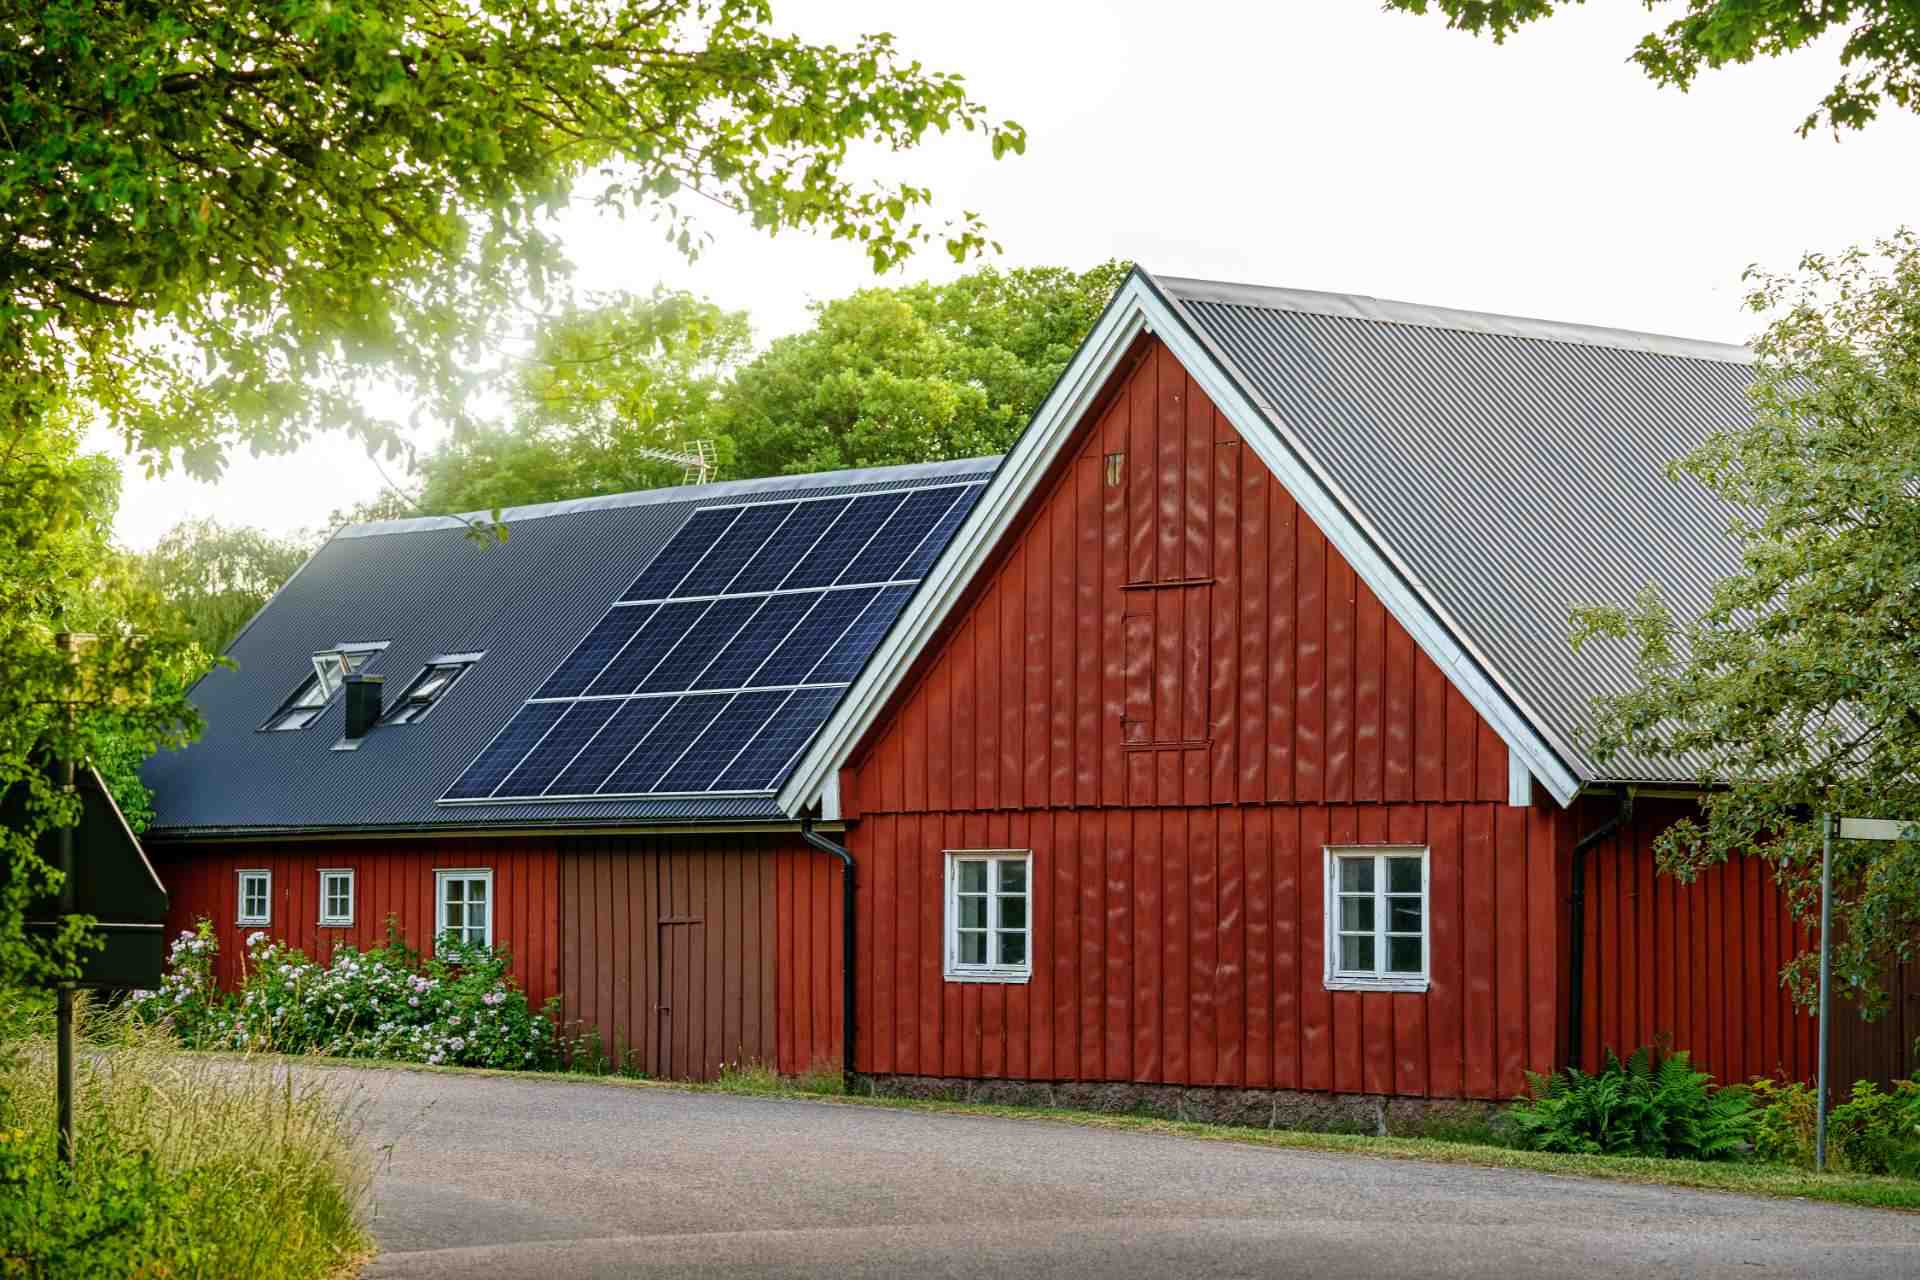 How much do solar panels cost for a 1500 square feet house?